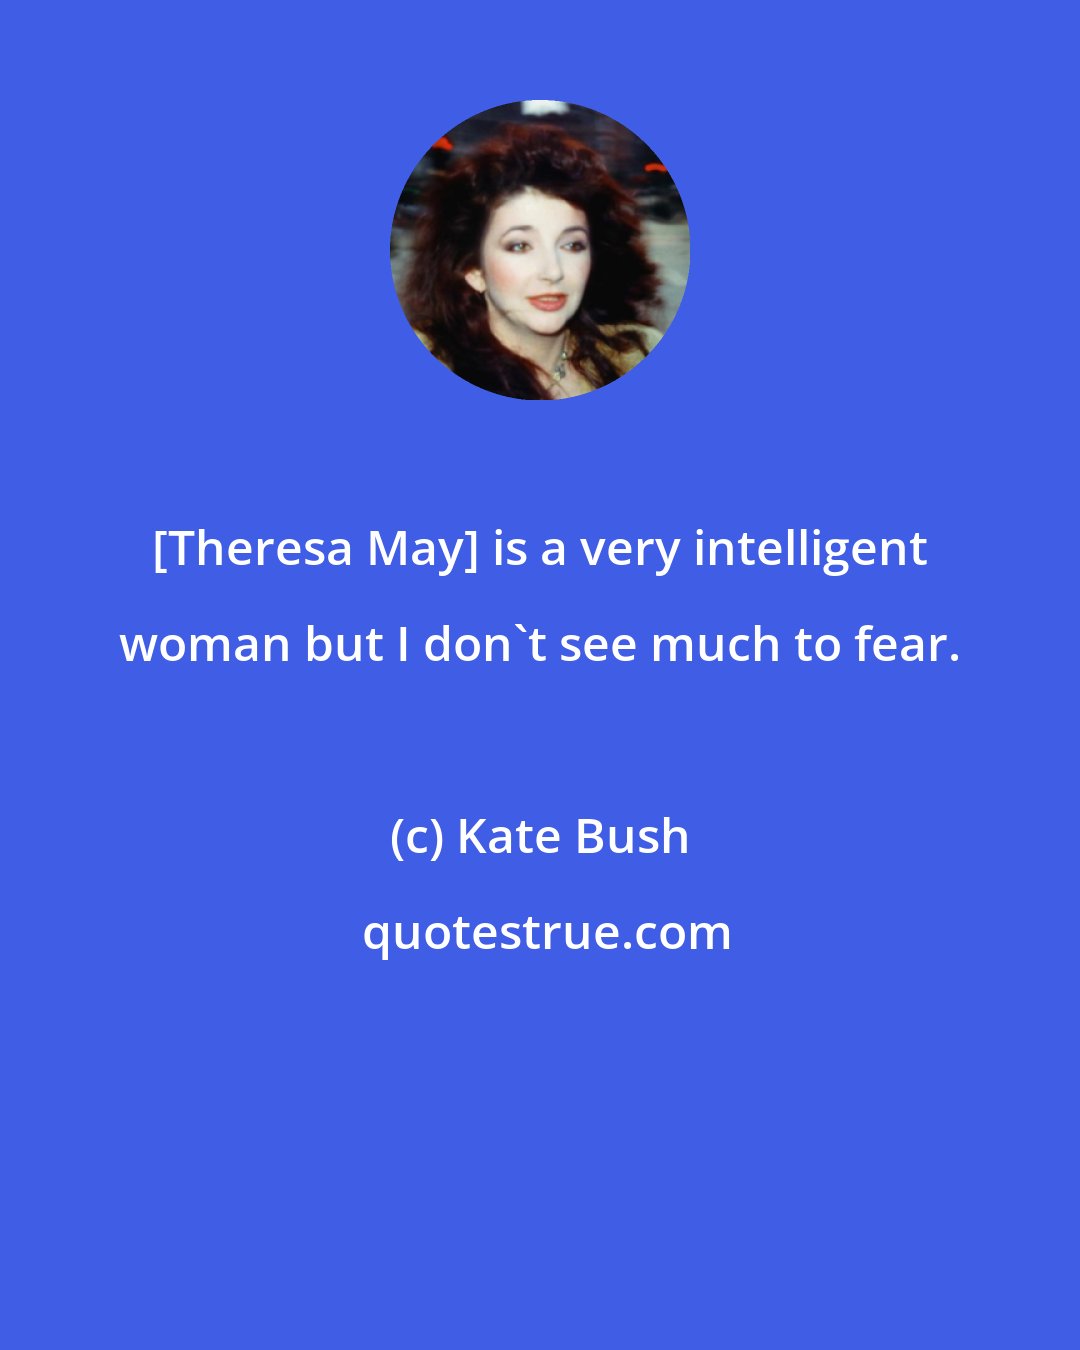 Kate Bush: [Theresa May] is a very intelligent woman but I don't see much to fear.